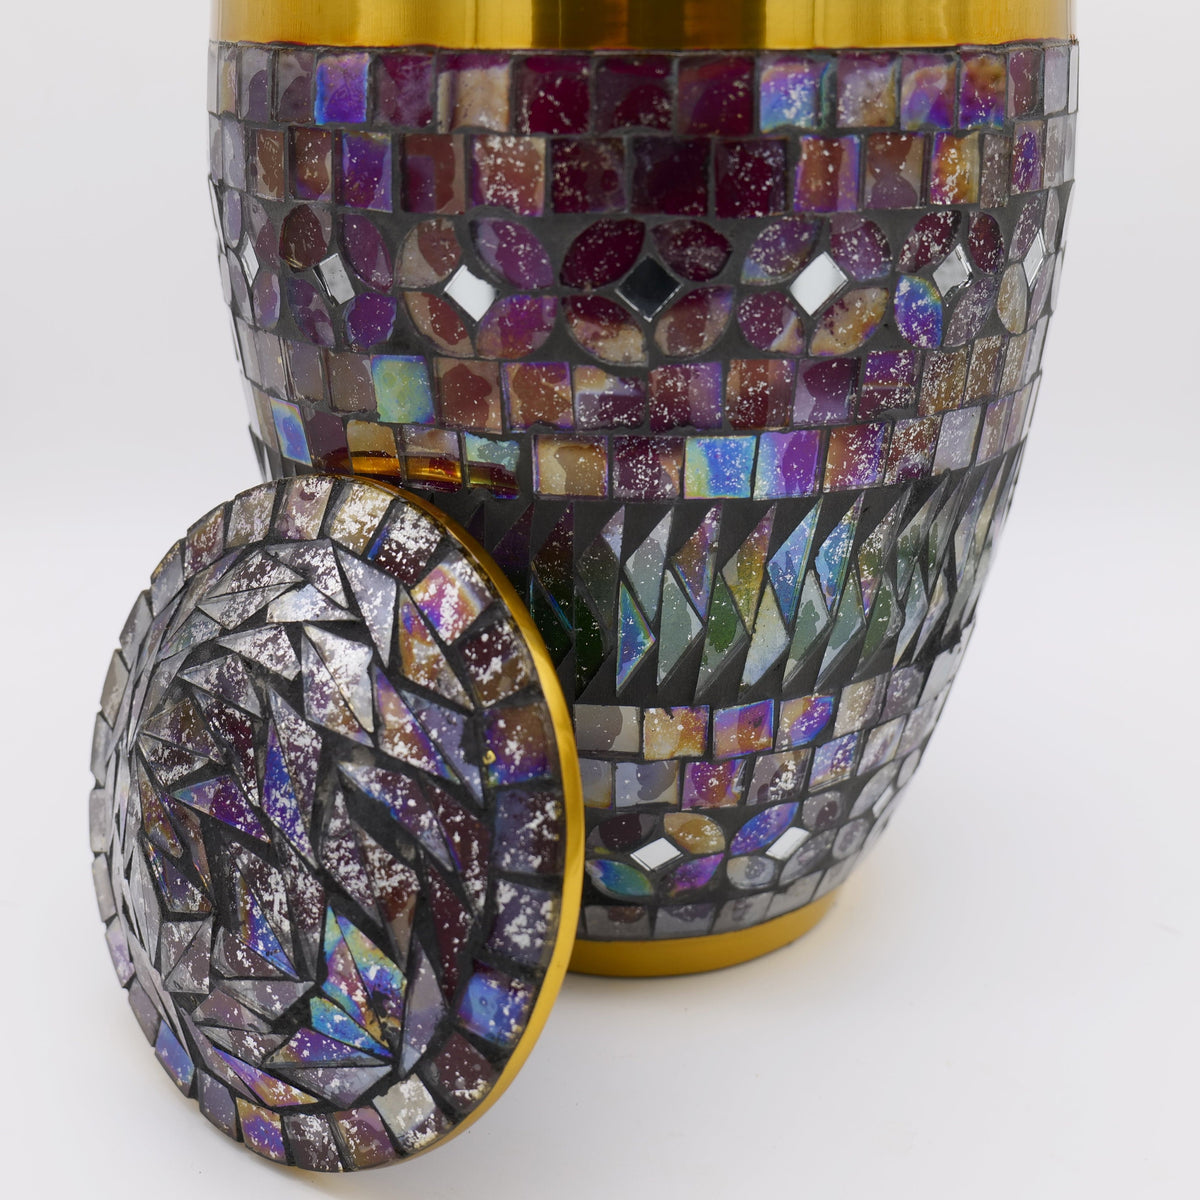 Commemorative Cremation Urns large Gold Cracked Glass Mosaic Cremation Urn